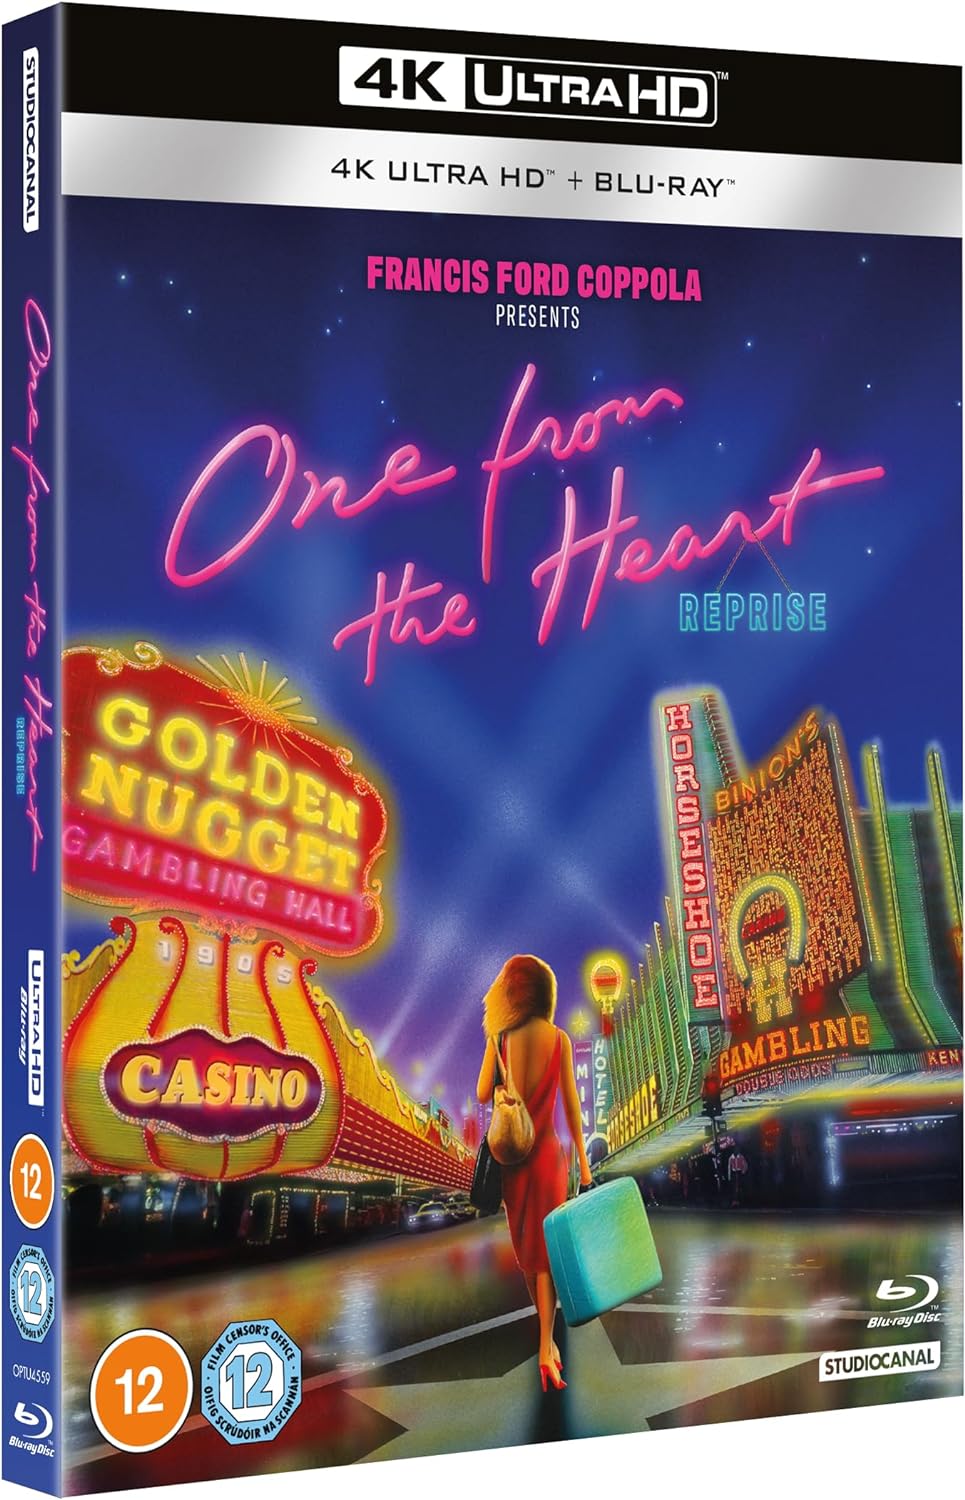 One From the Heart: Reprise Studio Canal 4K UHD/Blu-Ray [NEW] [SLIPCOVER]